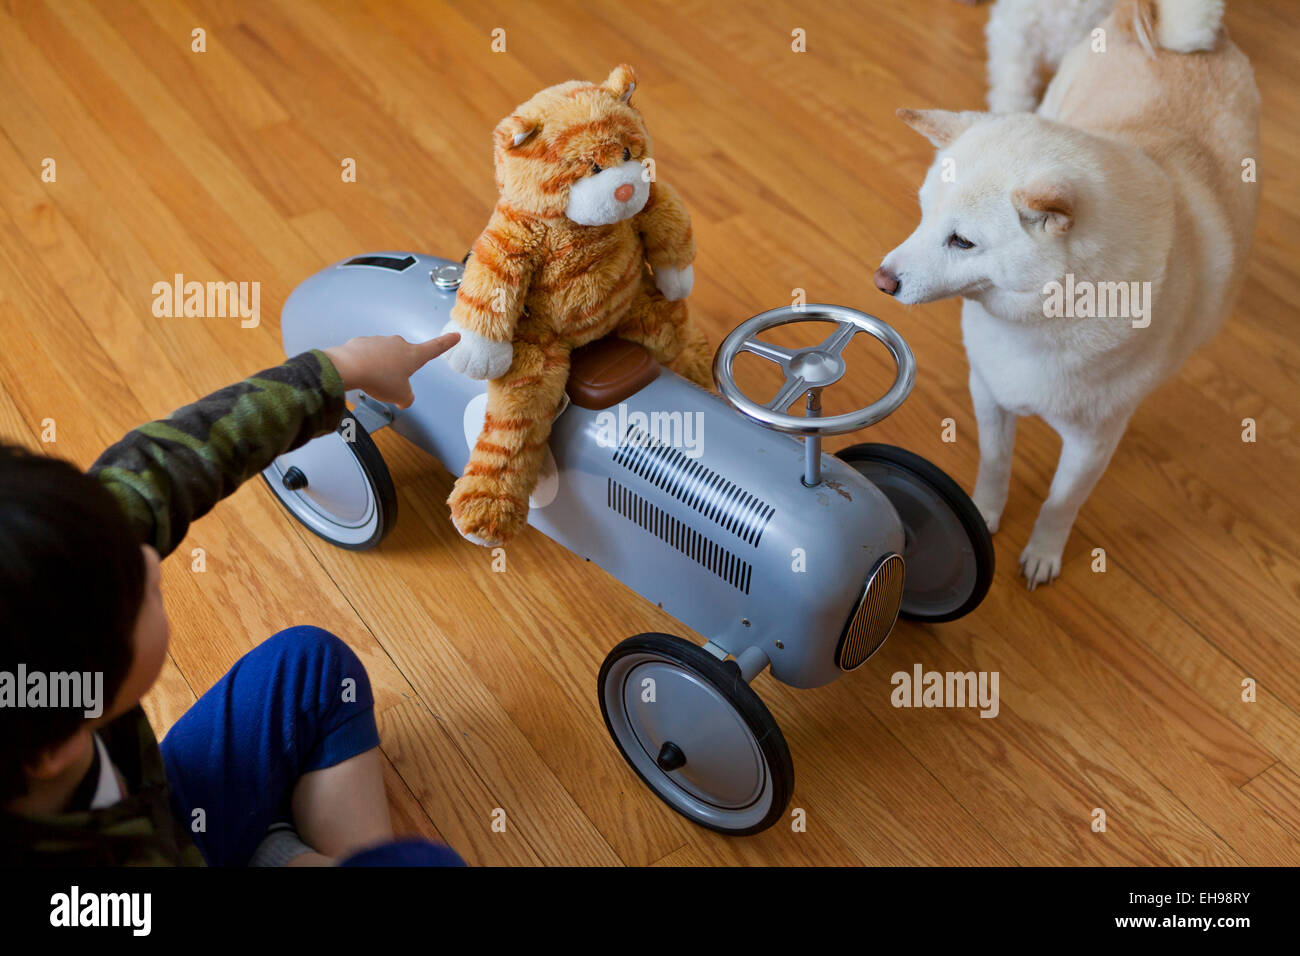 Boy, aged 6, playing with stuffed animal and dog on wooden floor - USA Stock Photo